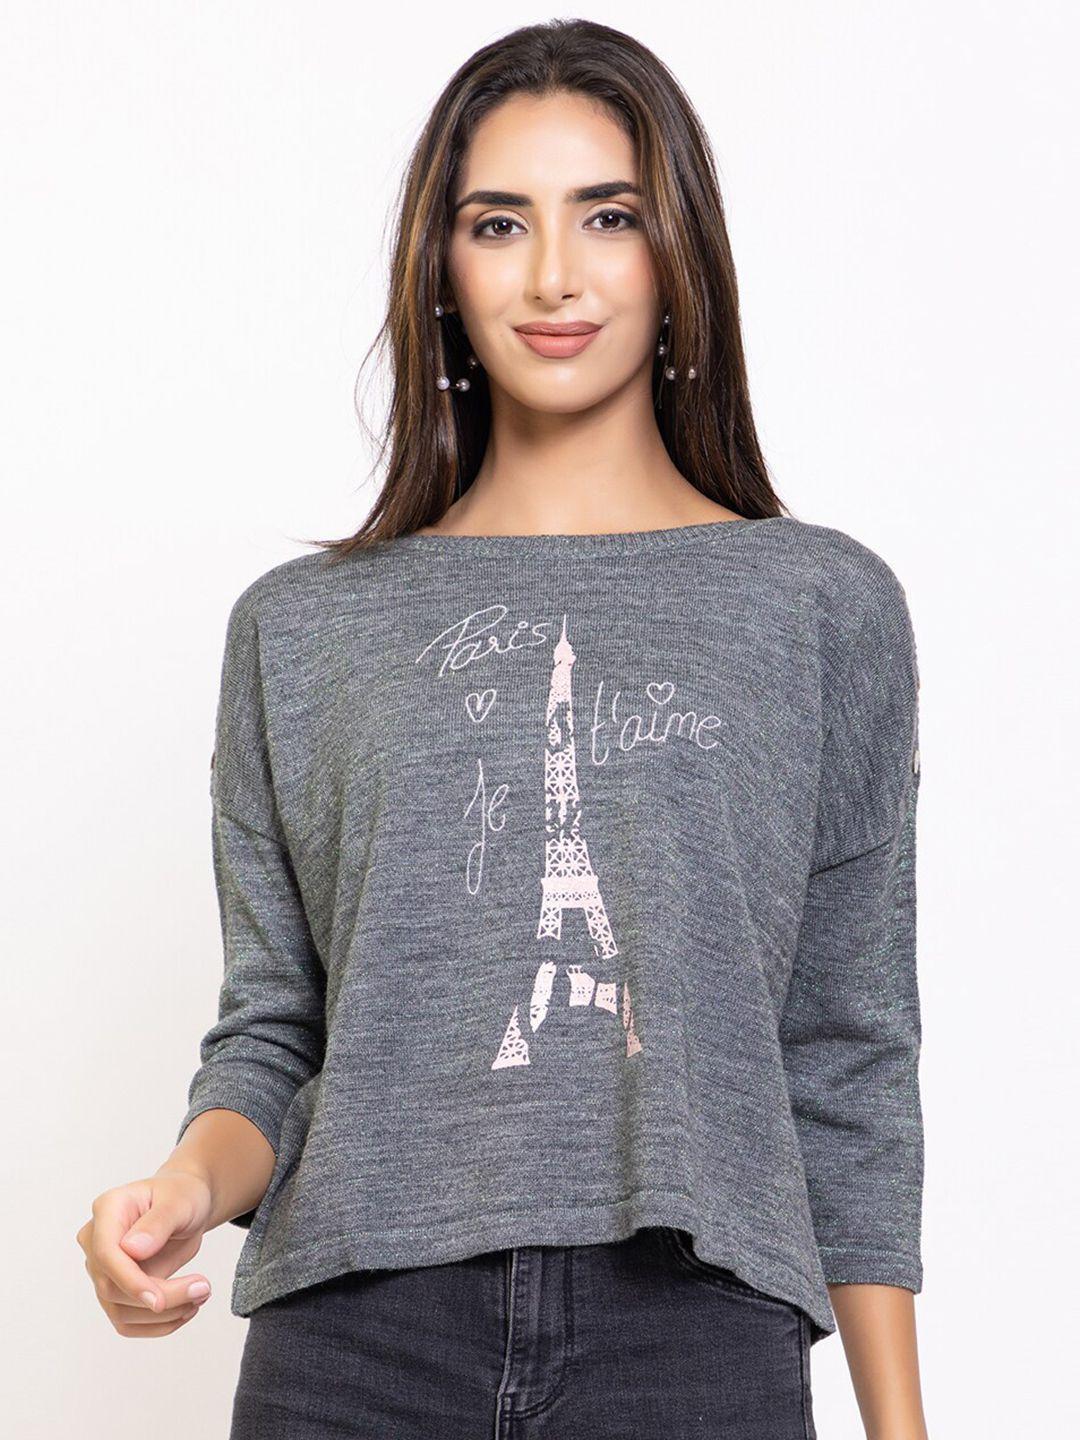 species women grey & off white graphic printed pullover